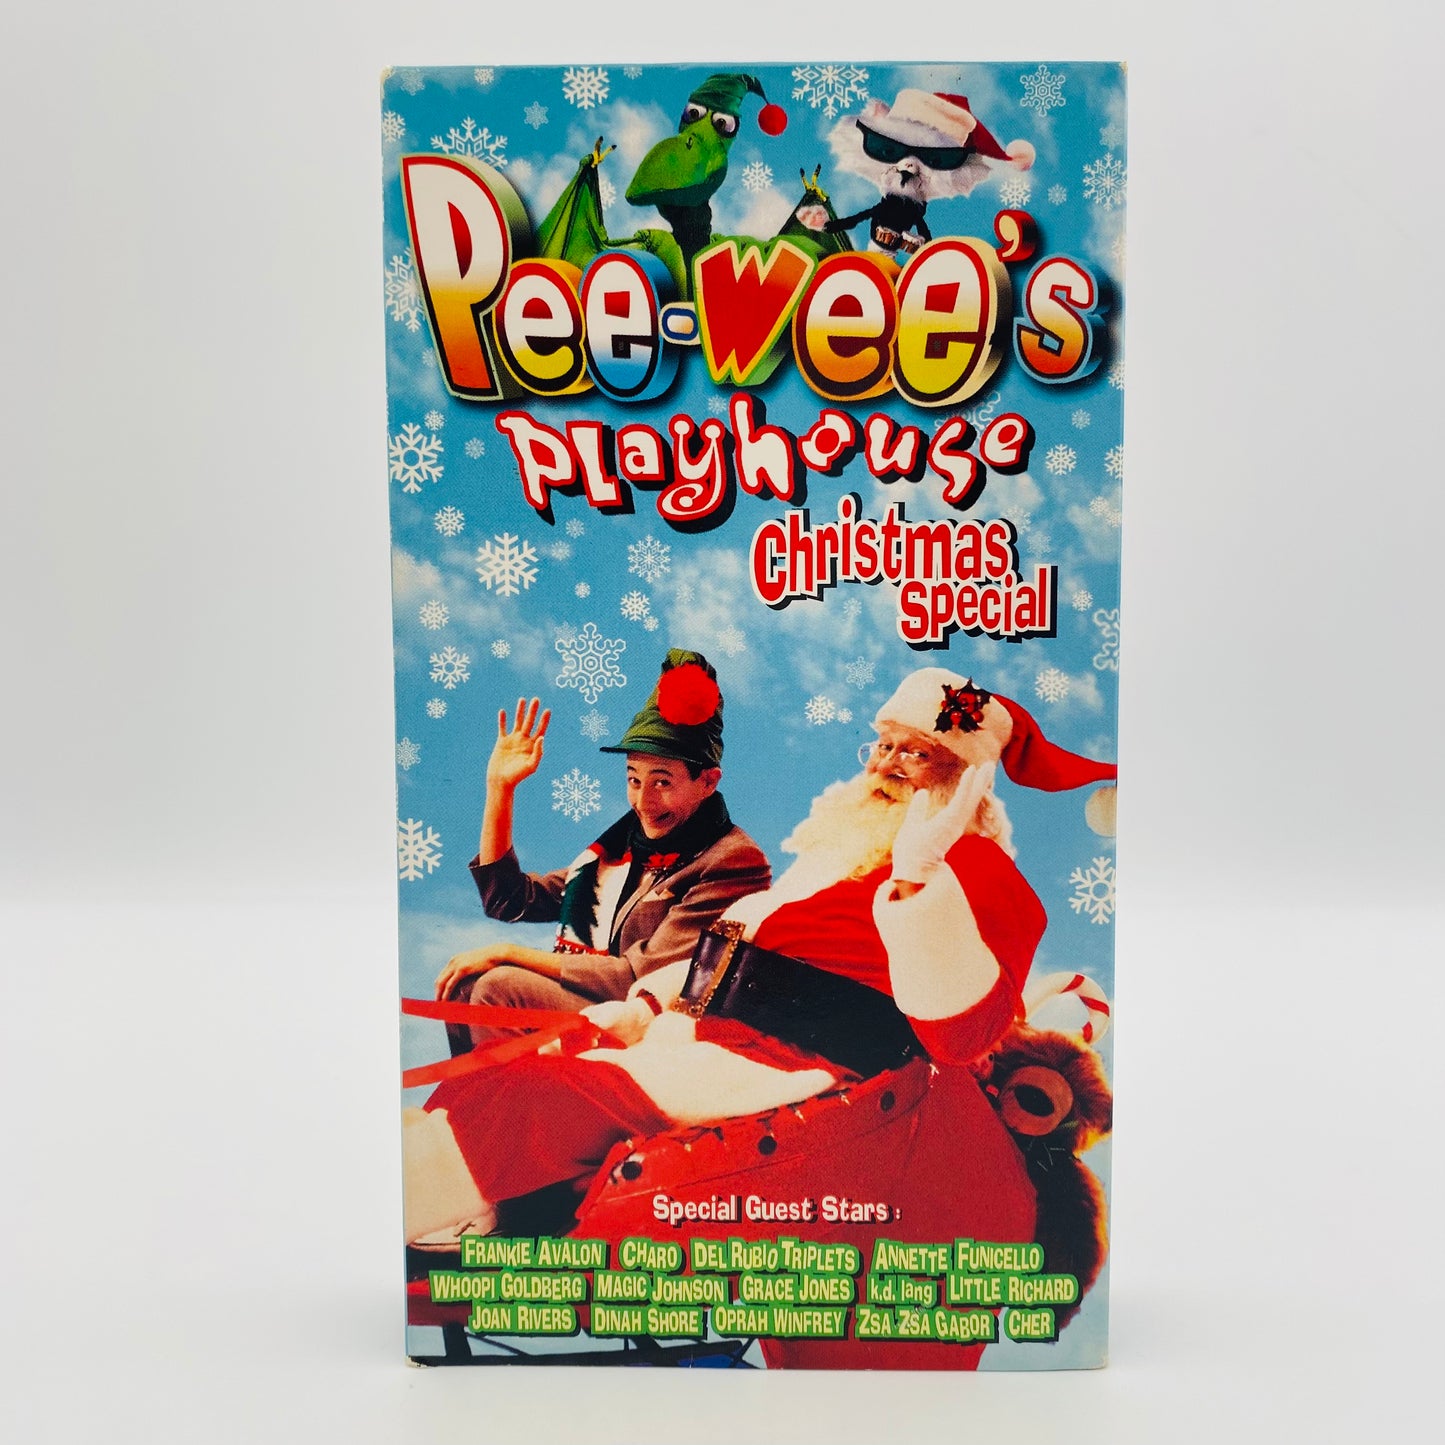 Pee-Wee’s Playhouse Christmas Special VHS tape (1996) MGM/UA Home Video